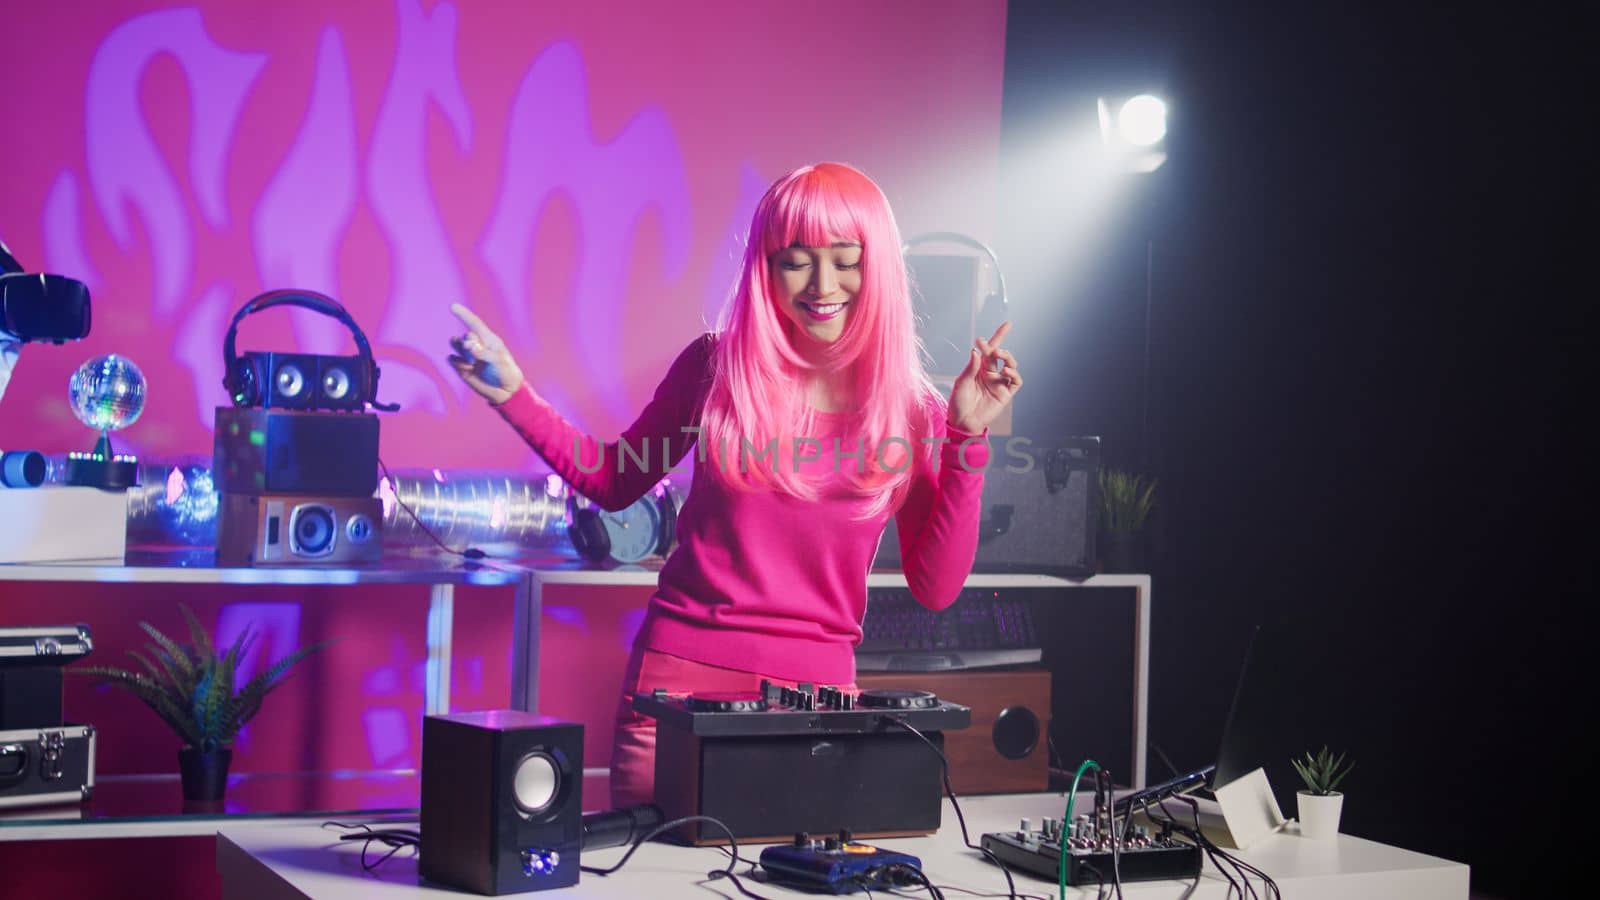 Cheerful dj performing electronic music during concert in nightclub, enjoying dancing and having fun with fans during performance. Asian performer mixing sound using professional mixer console